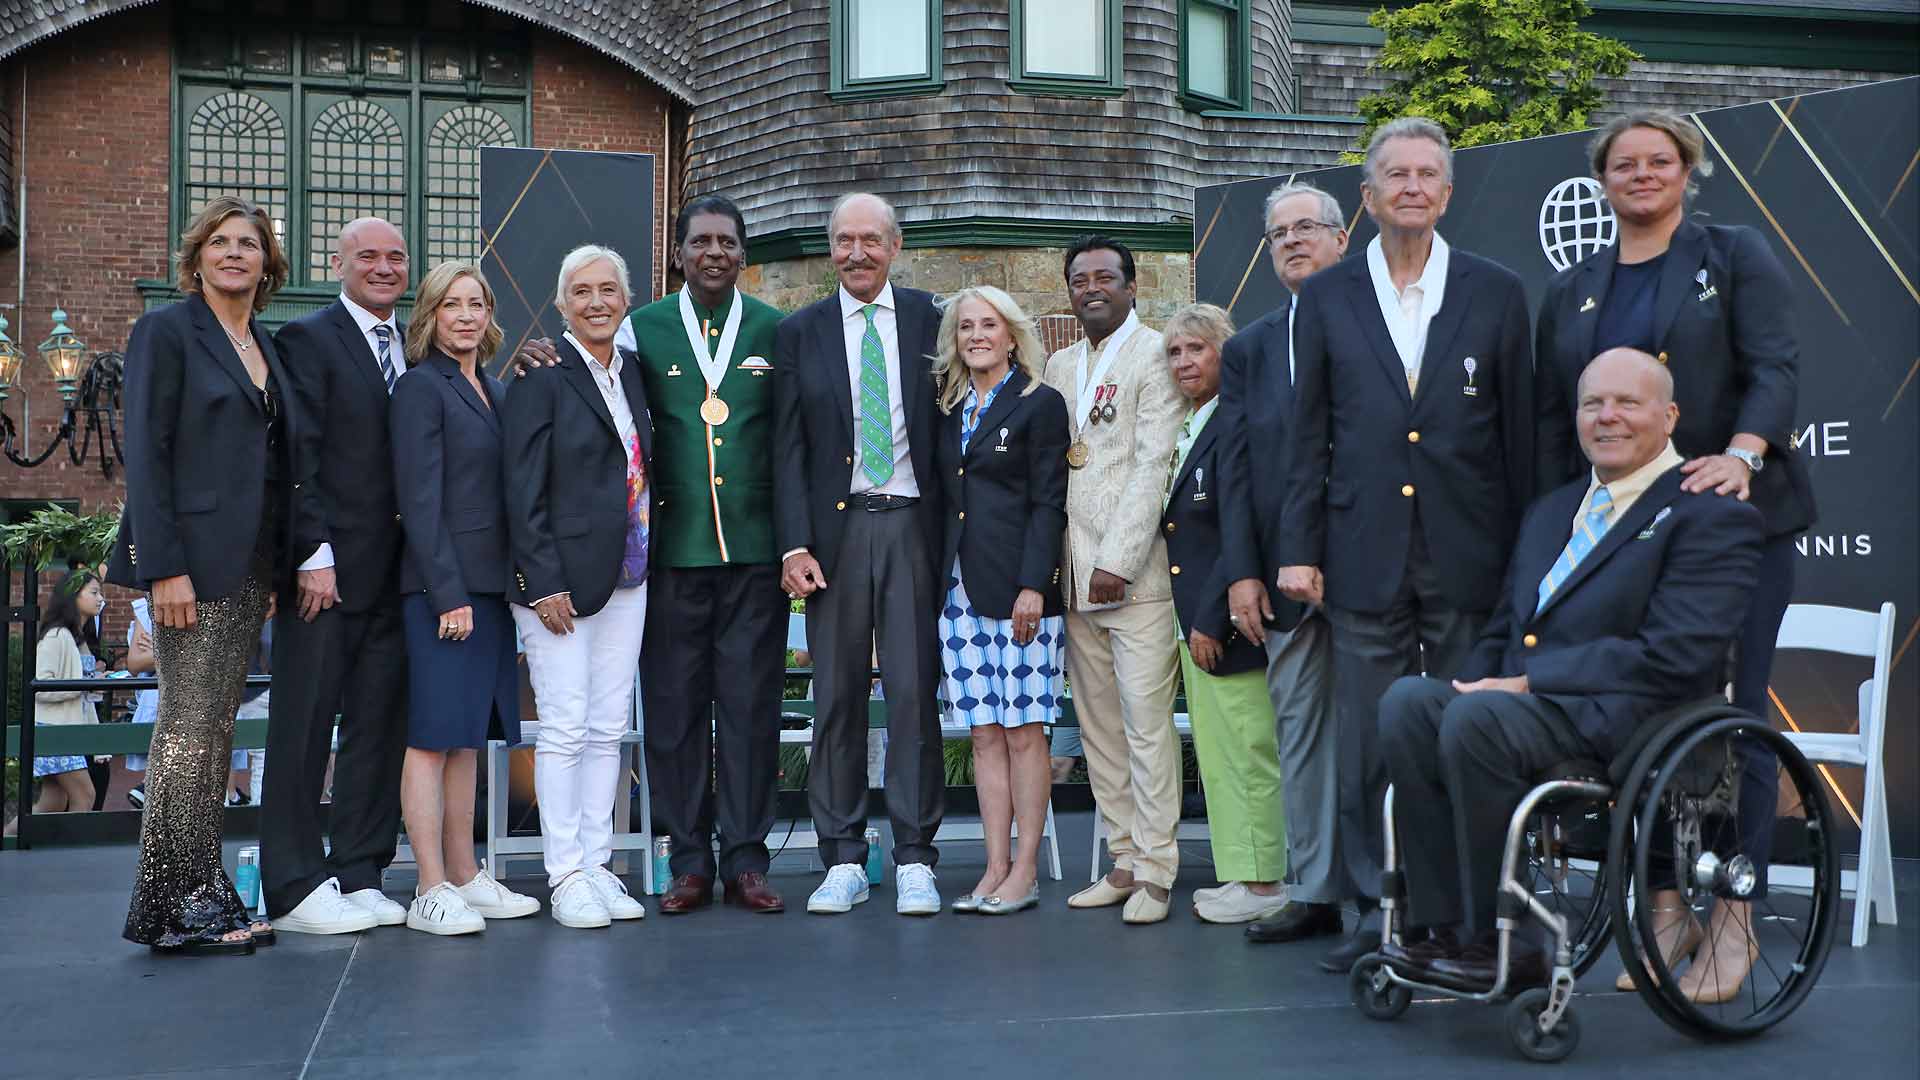 International Tennis Hall of Famers pose after Saturday evening's induction ceremony in Newport.